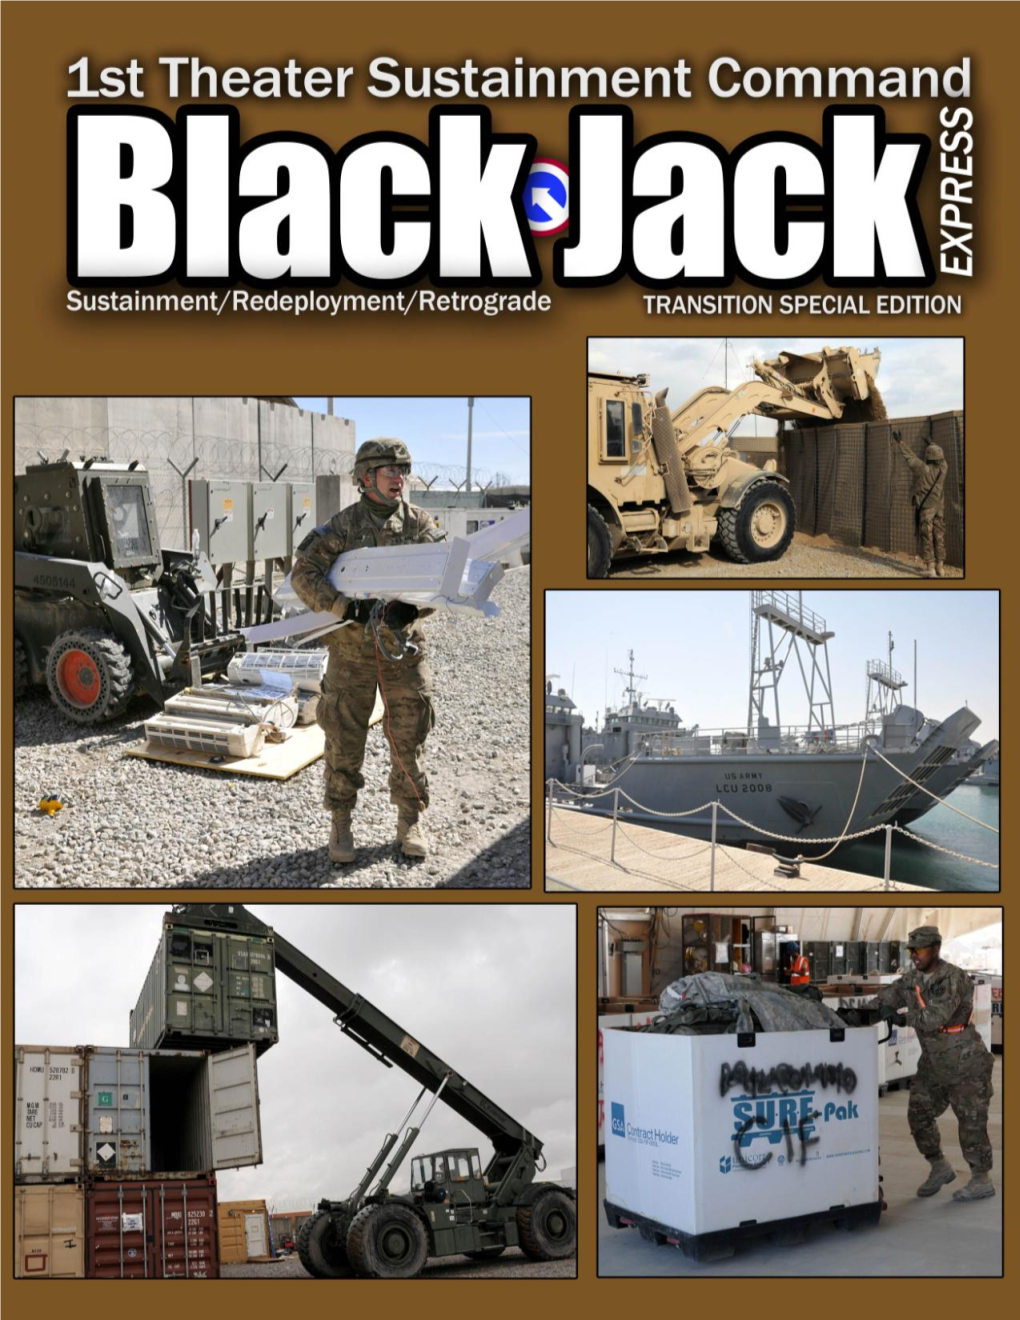 1St Theater Sustainment Command — Black Jack Express (For Access to Online and Additional Content, Click on the Icons, Links and Photos in This Issue.)